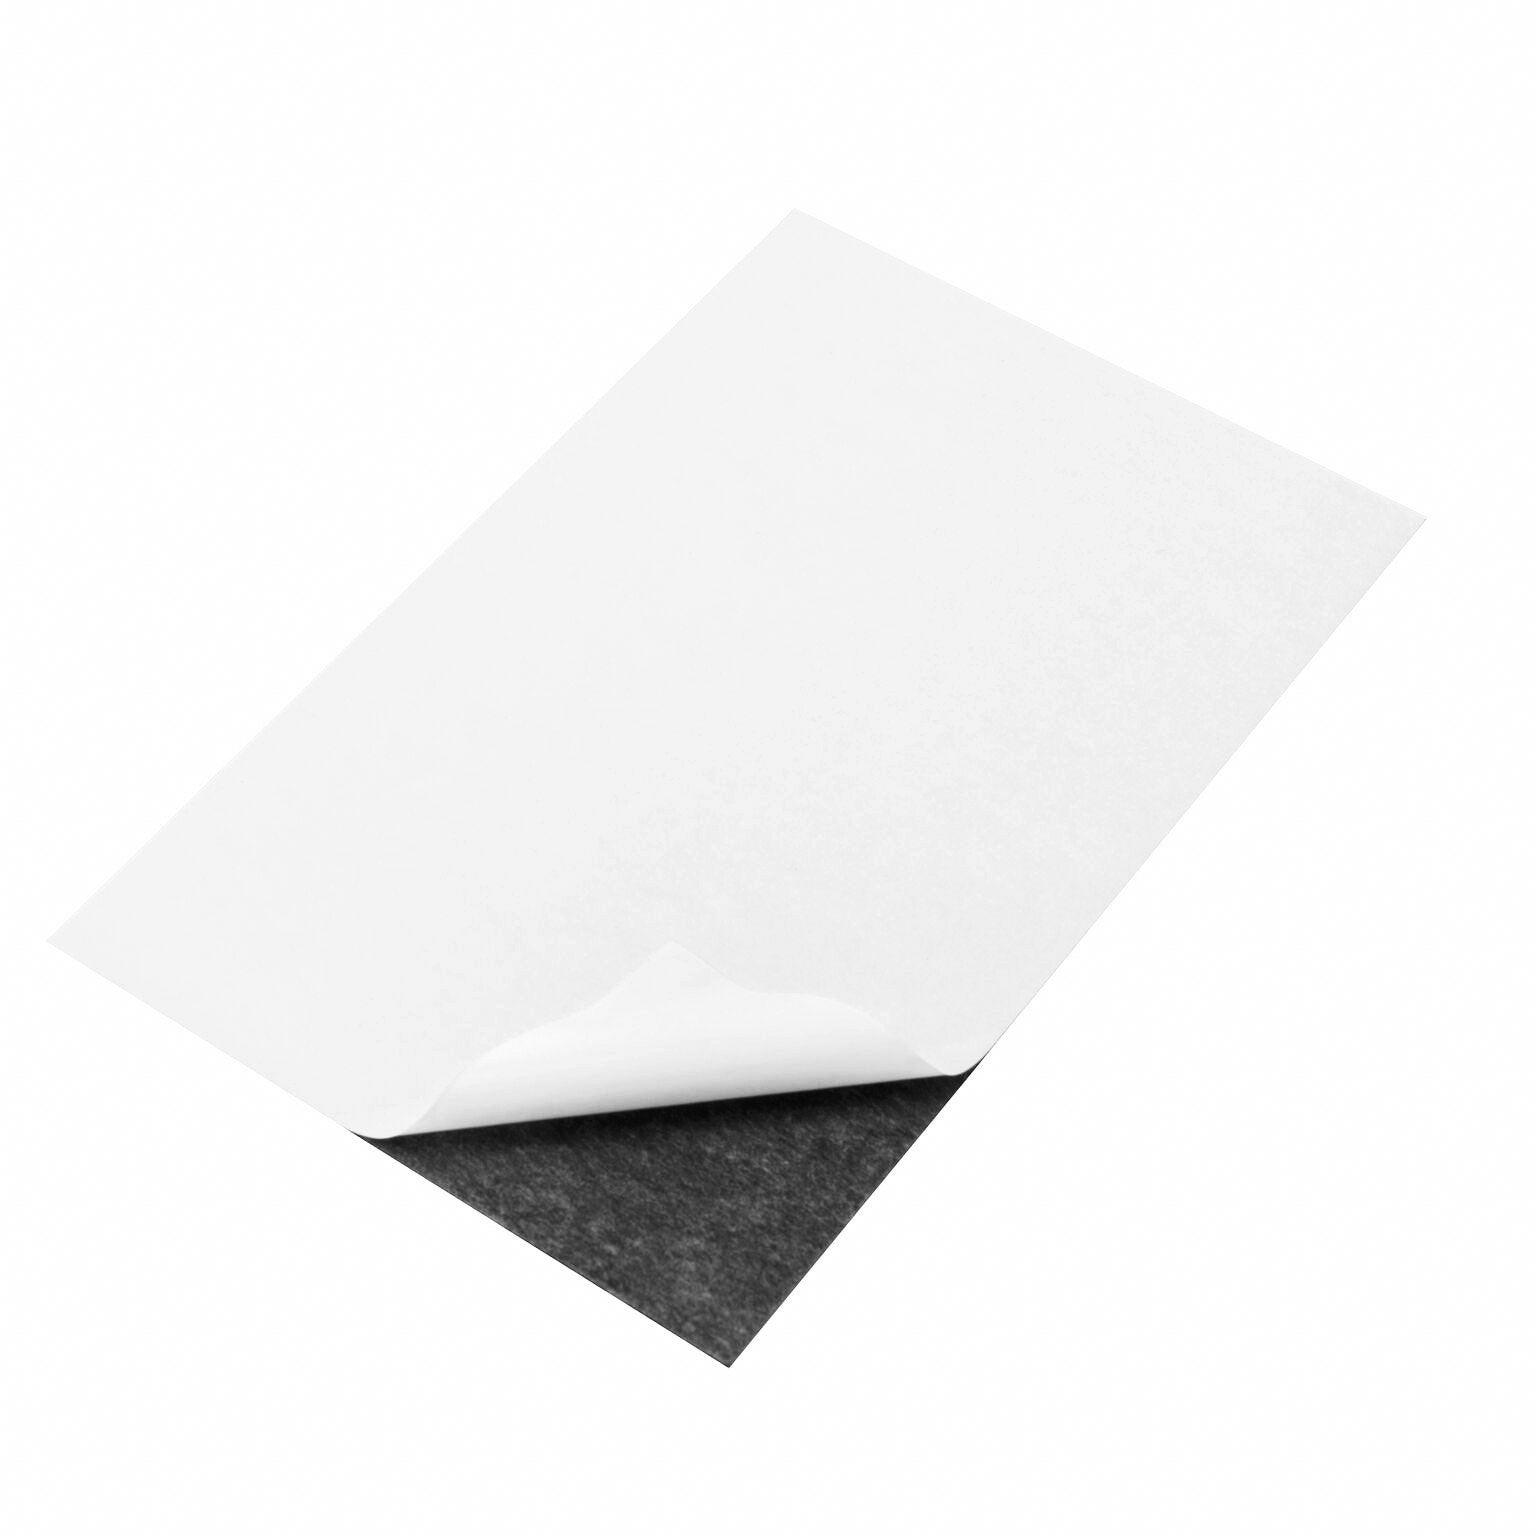 50 Self Adhesive Flexible Magnetic Sheets 8.5 x 11 inches